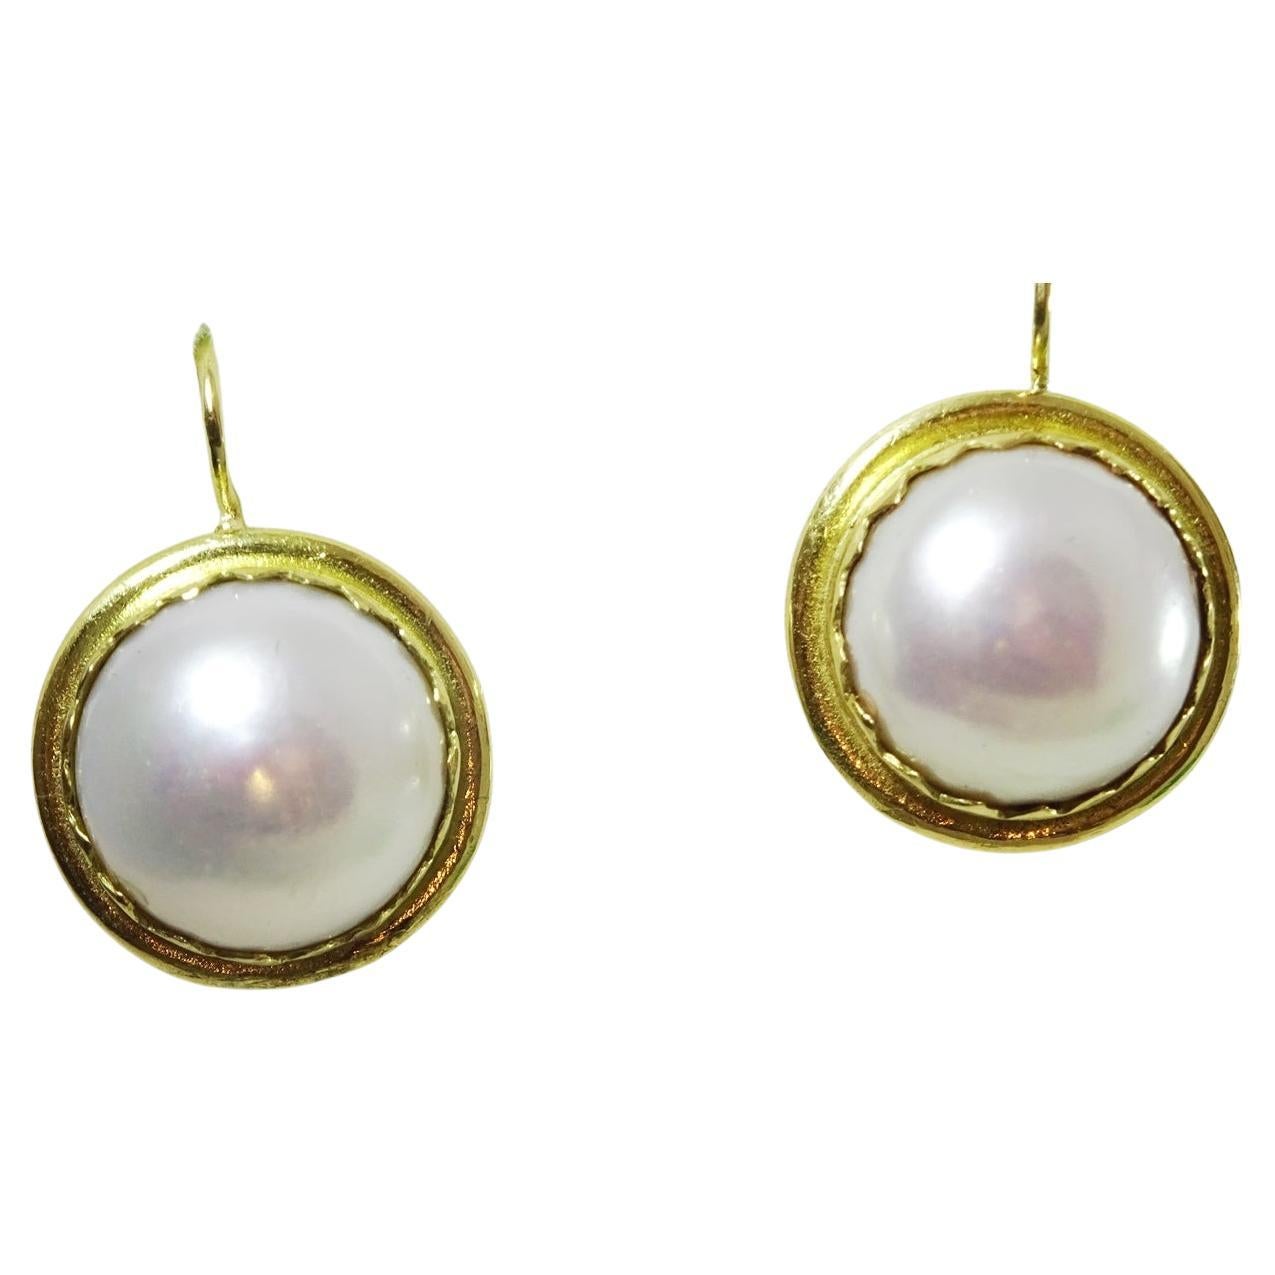 15 mm Round Pearl and 18 karat Gold Earrings.